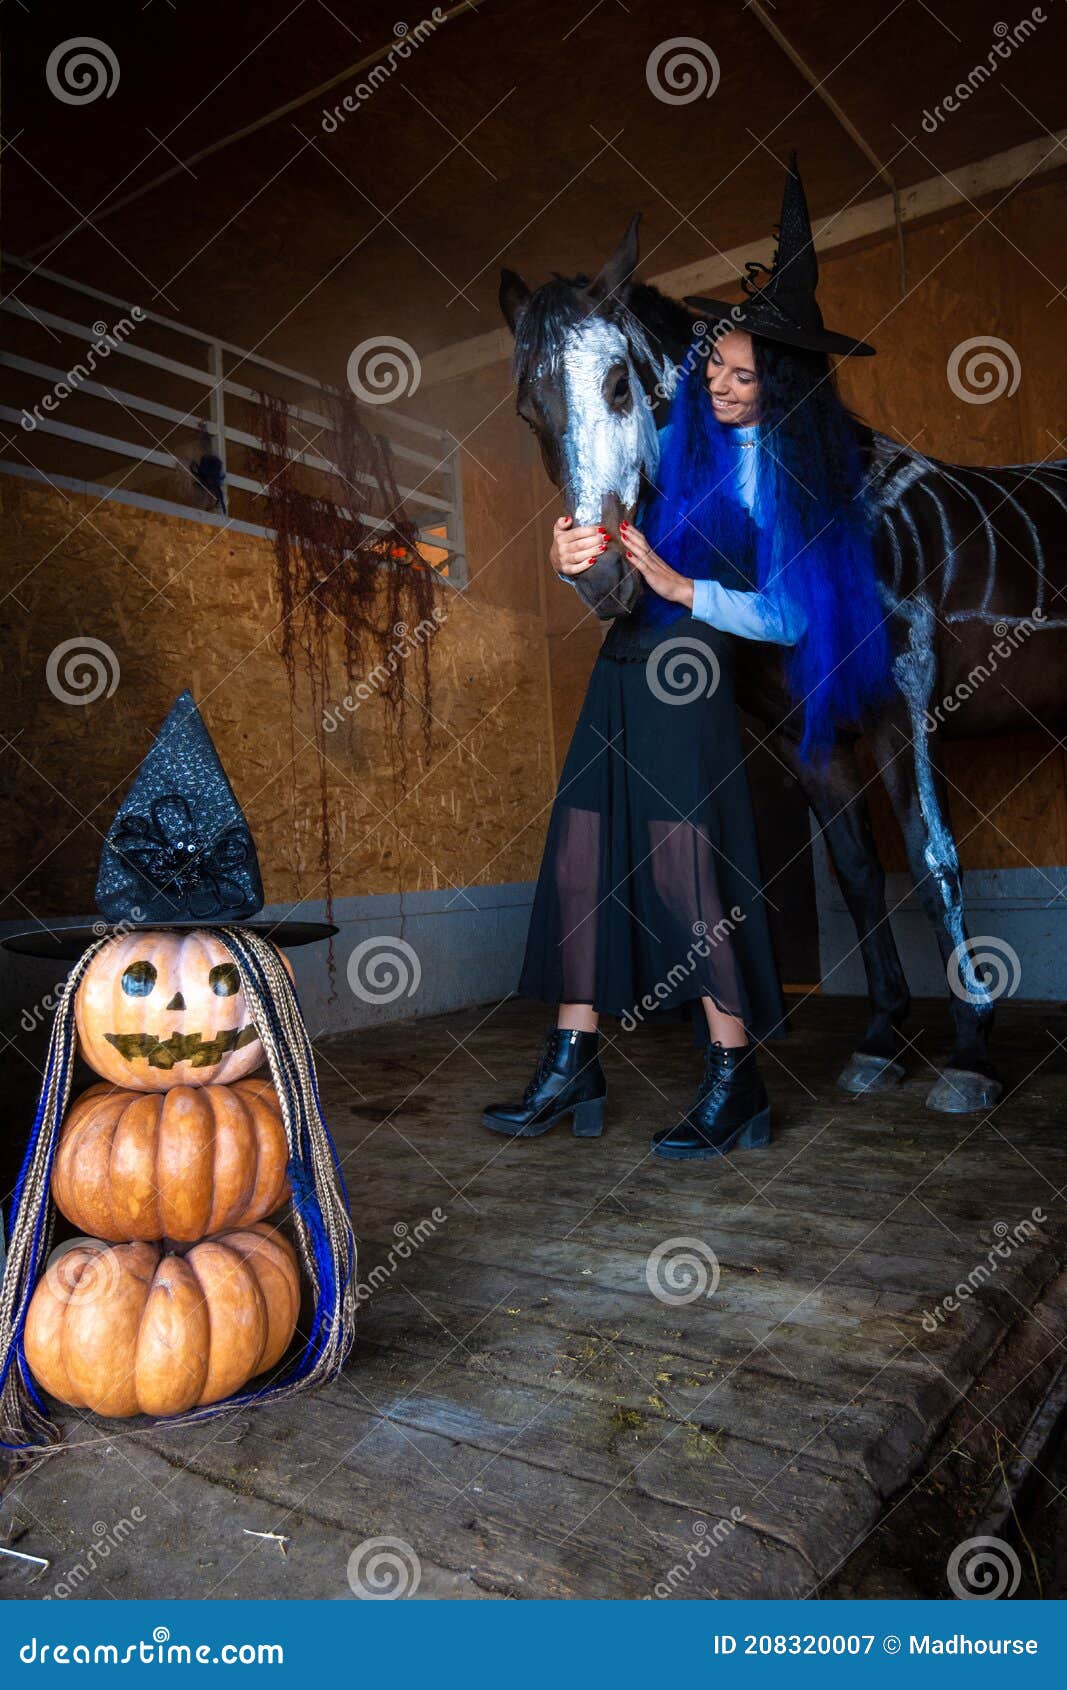 A Girl in a Witch Costume Hugs a Horse in a Corral, in the Foreground an Evil Figure of Pumpkins Stock Image - Image of pumpkin, dress: 208320007